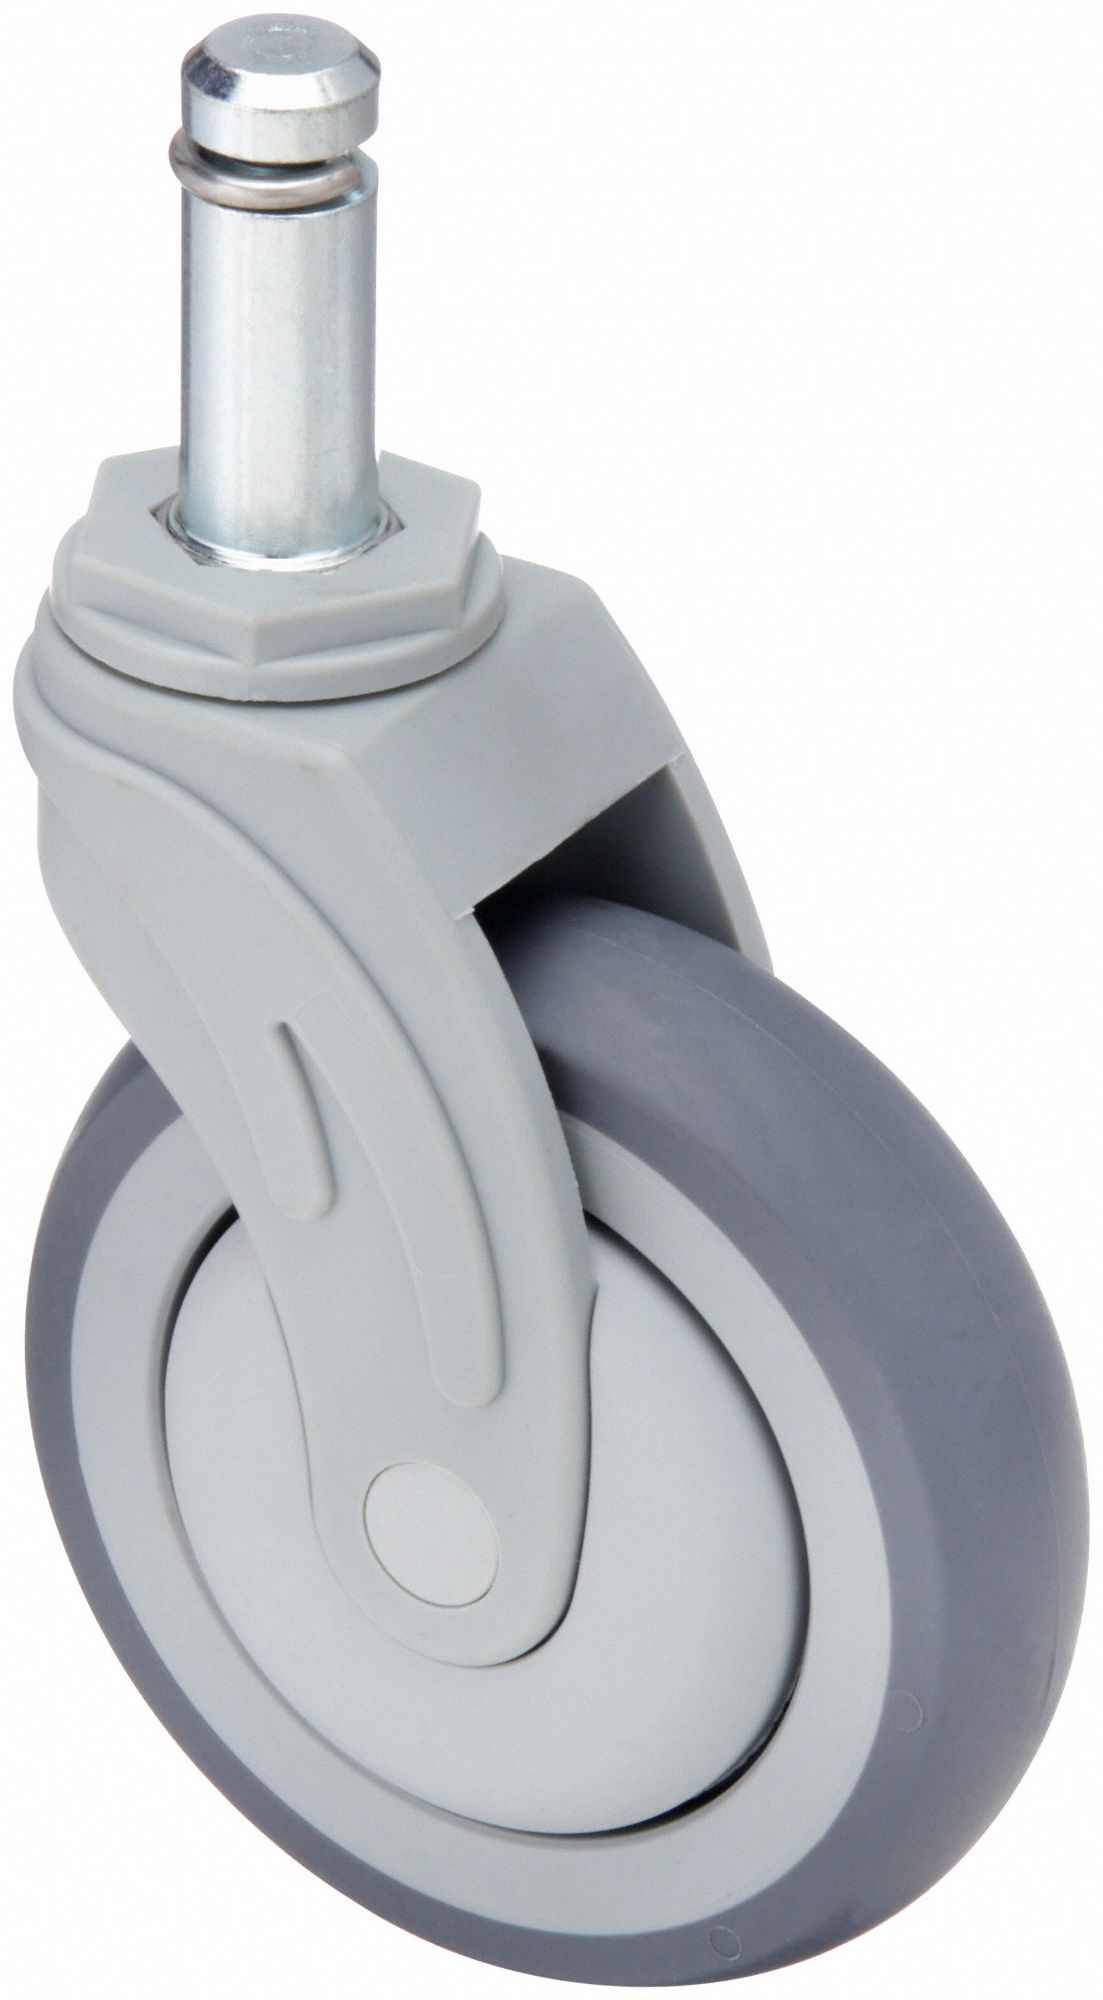 APPROVED VENDOR Maintenance-Free High-Performance Friction-Ring Stem  Caster: 5 in Wheel Dia., 220 lb